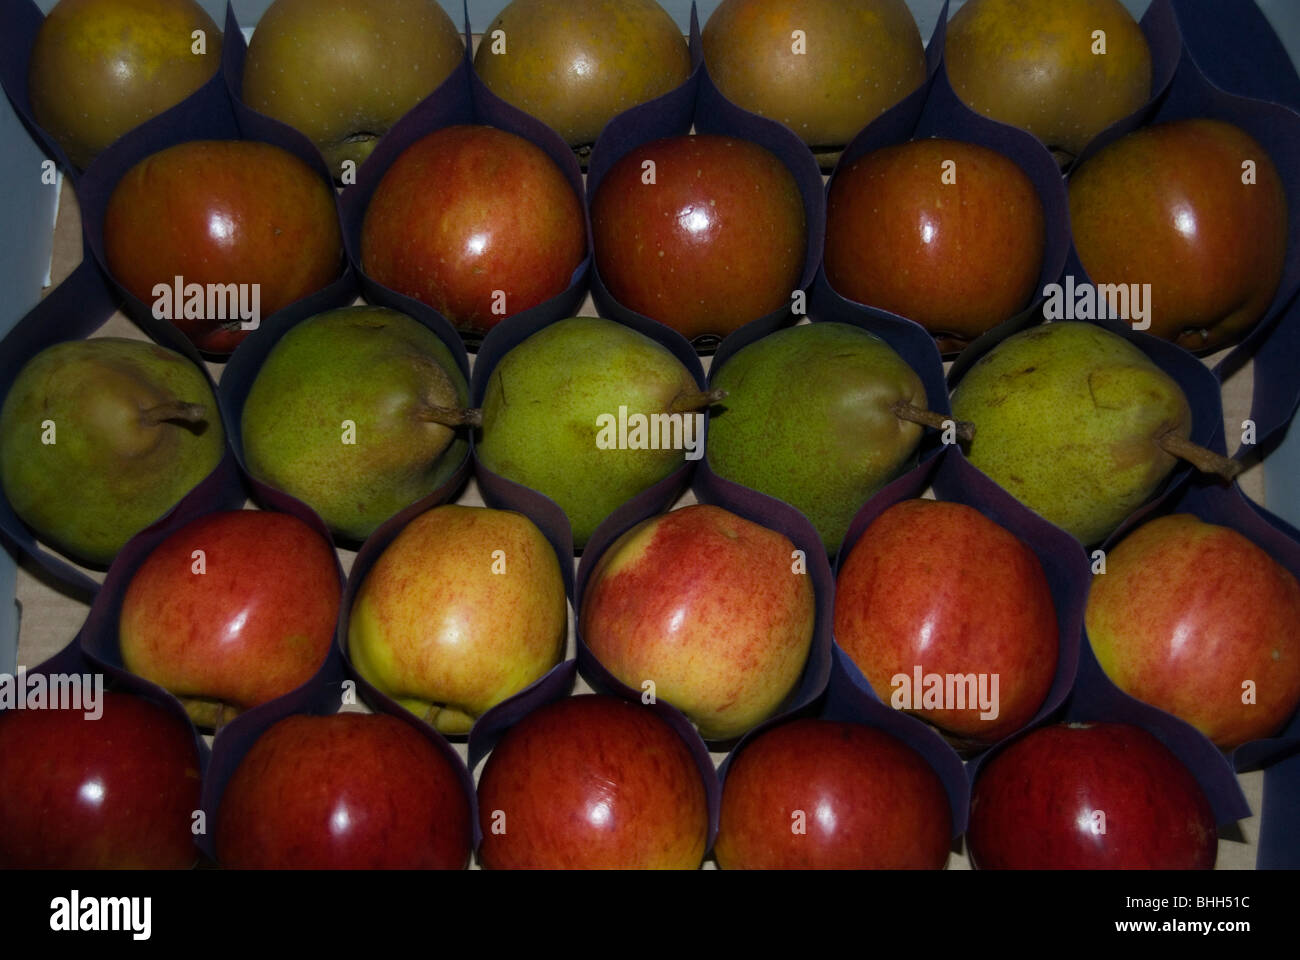 A selection of apples and pears Stock Photo